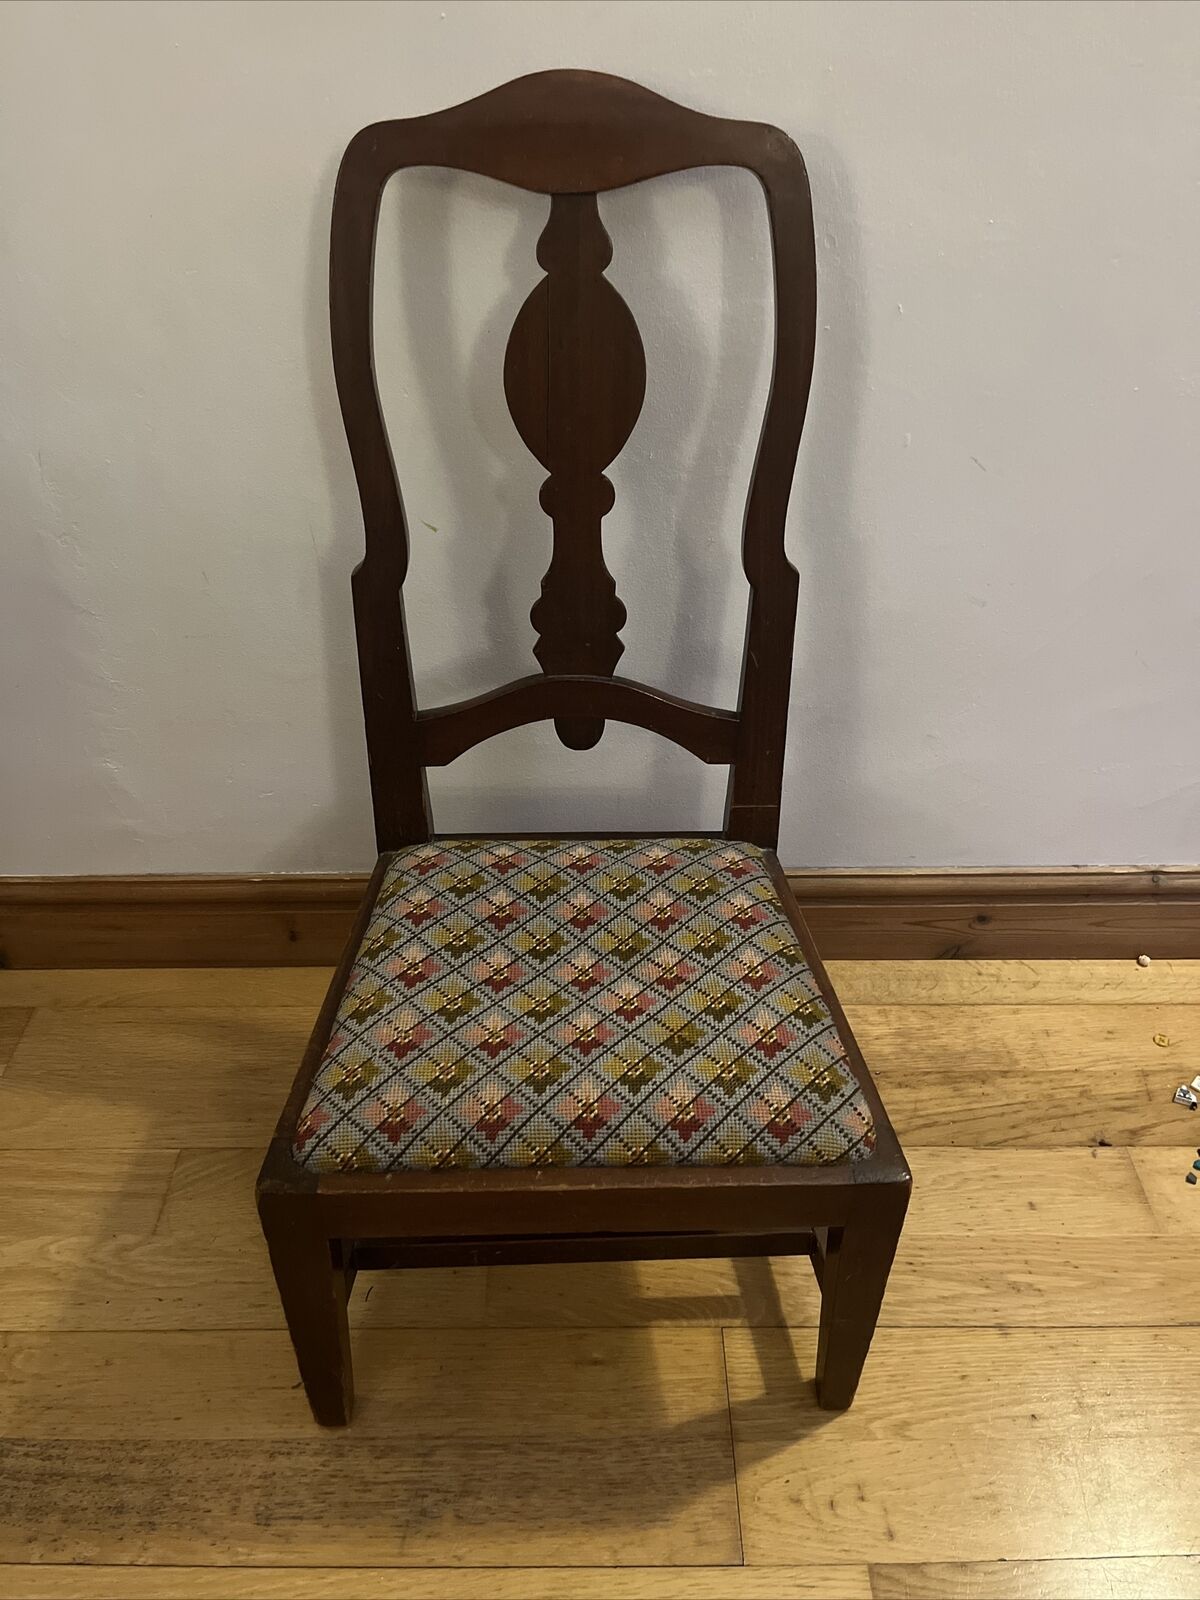 Edwardian Hall Chair with Tapestry Seat - Occasional Chair